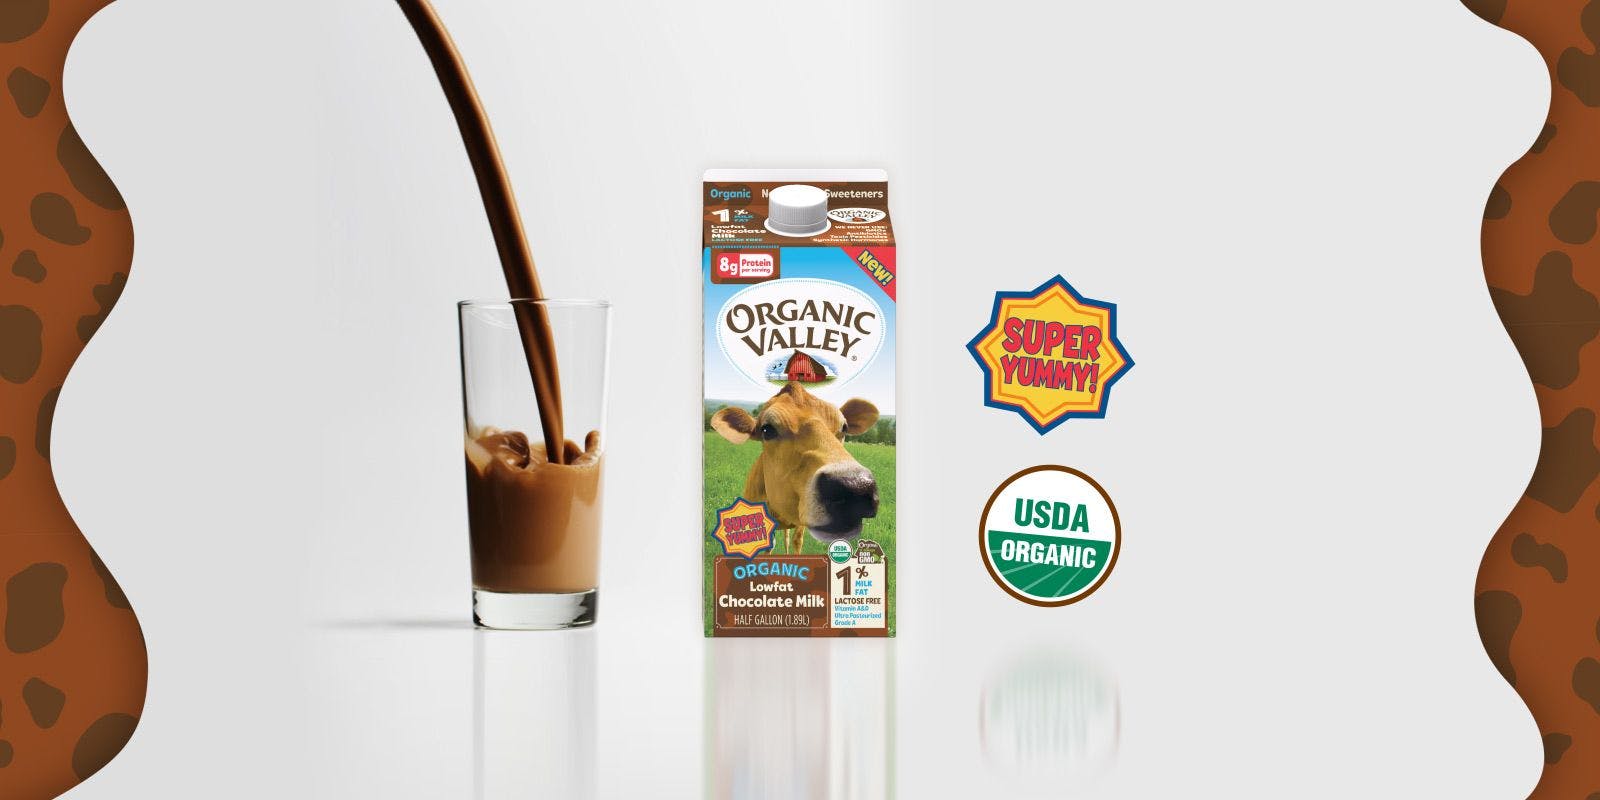 Chocolate milk being poured into a glass next to the Organic Valley 1 percent chocolate milk carton and two icons that say super yummy and USDA organic.